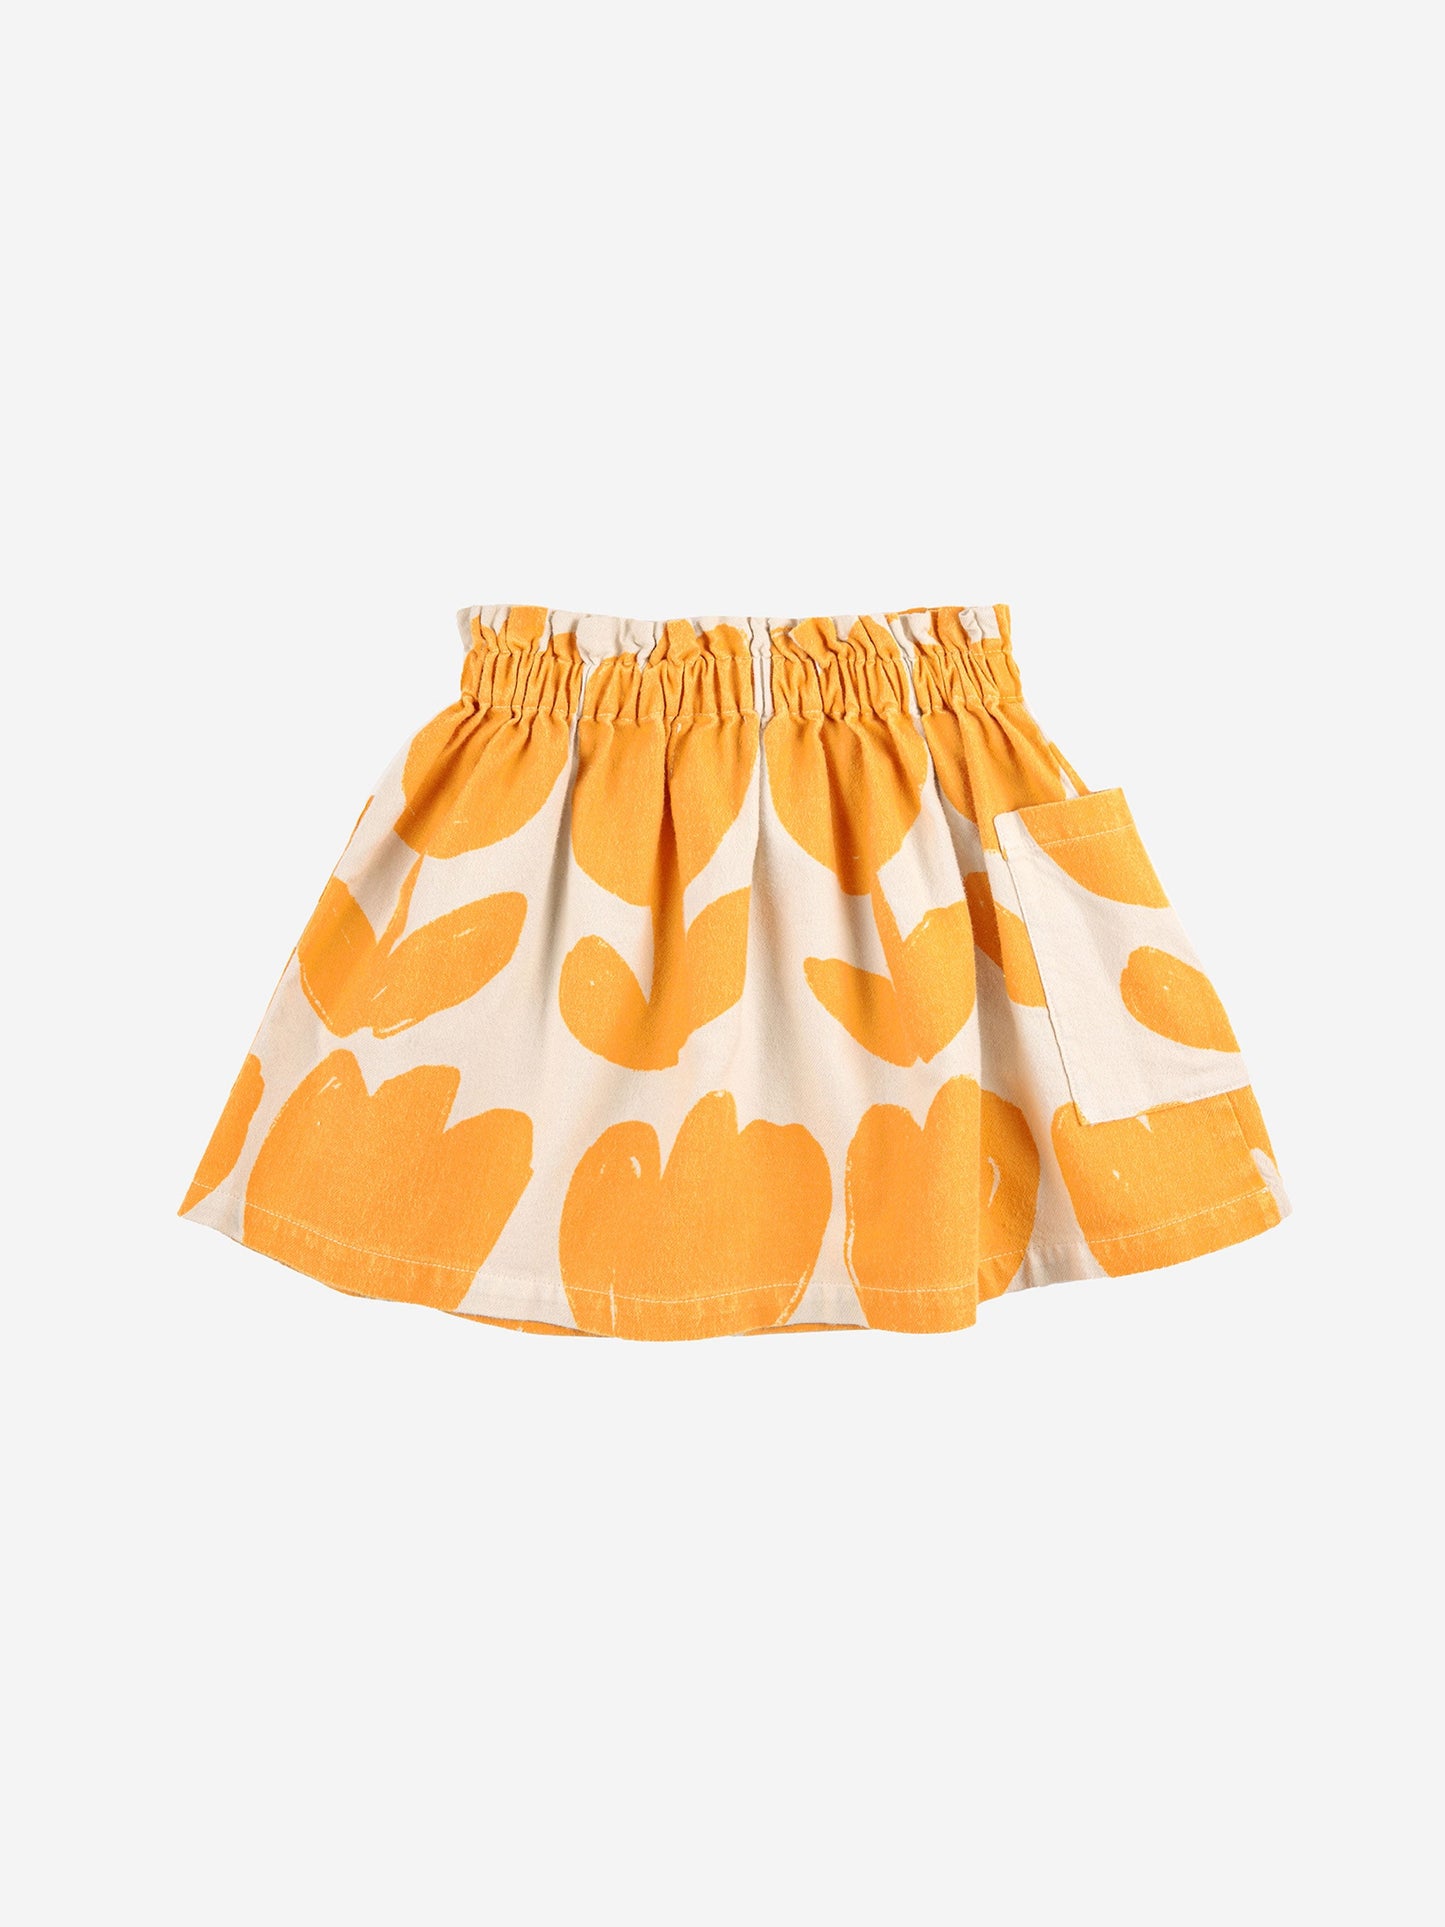 Big Flowers Woven Skirt by Bobo Choses. 100% cotton off white knee length skirt. Designed with elasticated waistband, patched side pocket, embroidery and over knee length. Made ethically and sustainably in Spain for Bobo Choses.